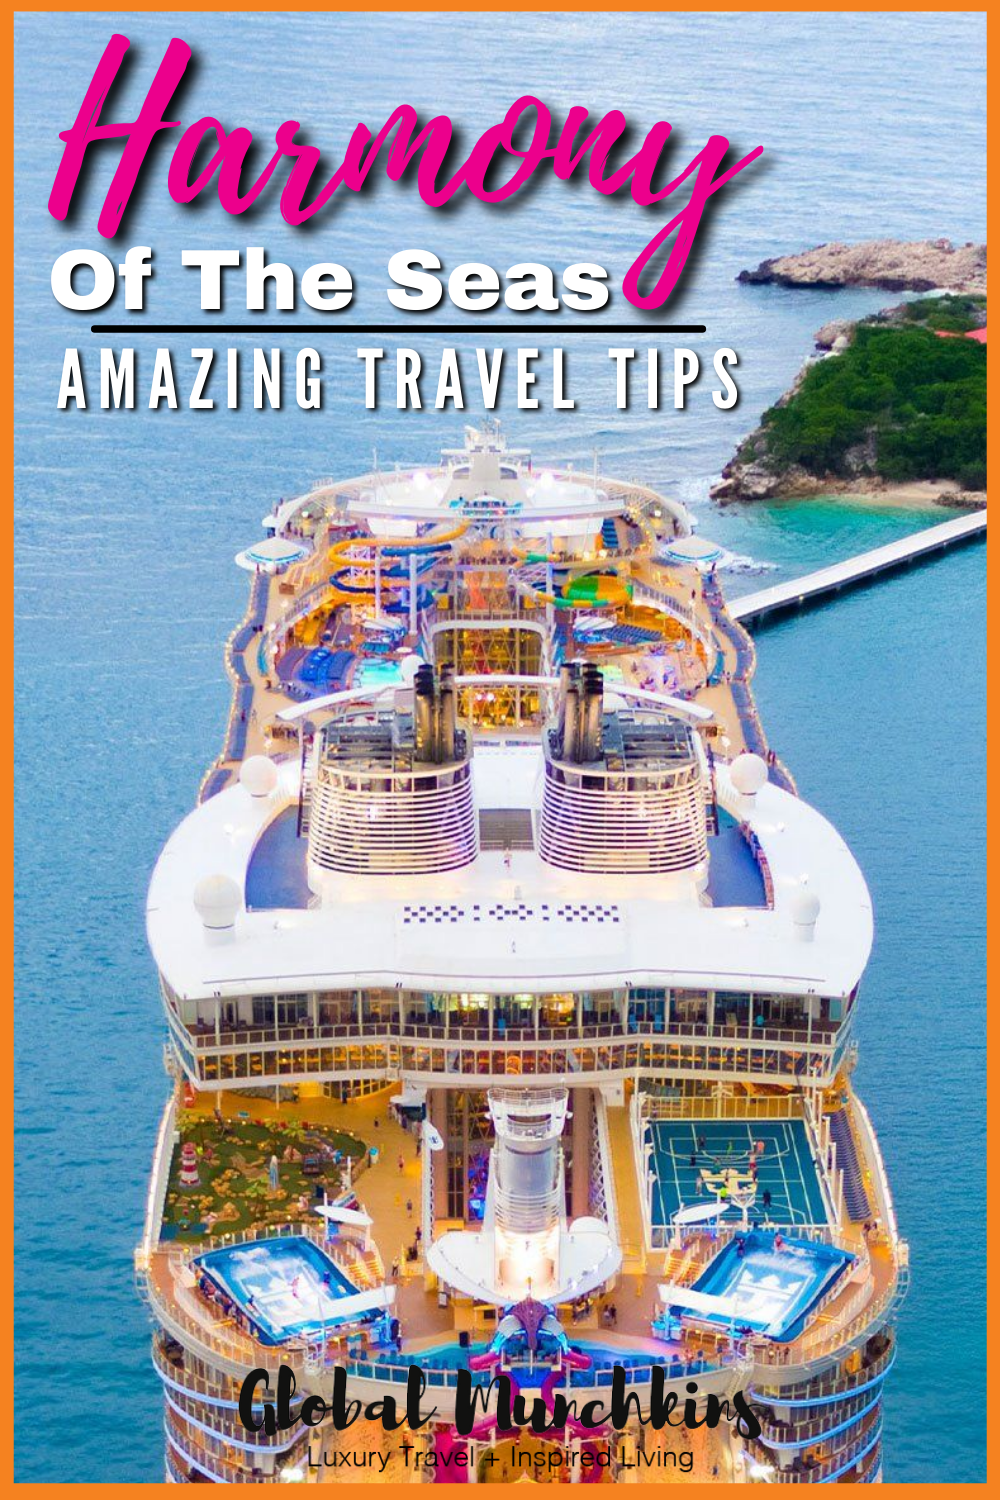 Everything you need to know about Royal Caribbean’s NEWEST & LARGEST ship including our Harmony of the Seas itinerary, a peek inside the Harmony of the Seas cabins, things to do on the ship, dining options, kids club & more! Get ready to have fun because the Harmony of the Seas ship is the most incredible ship we have ever been on. 